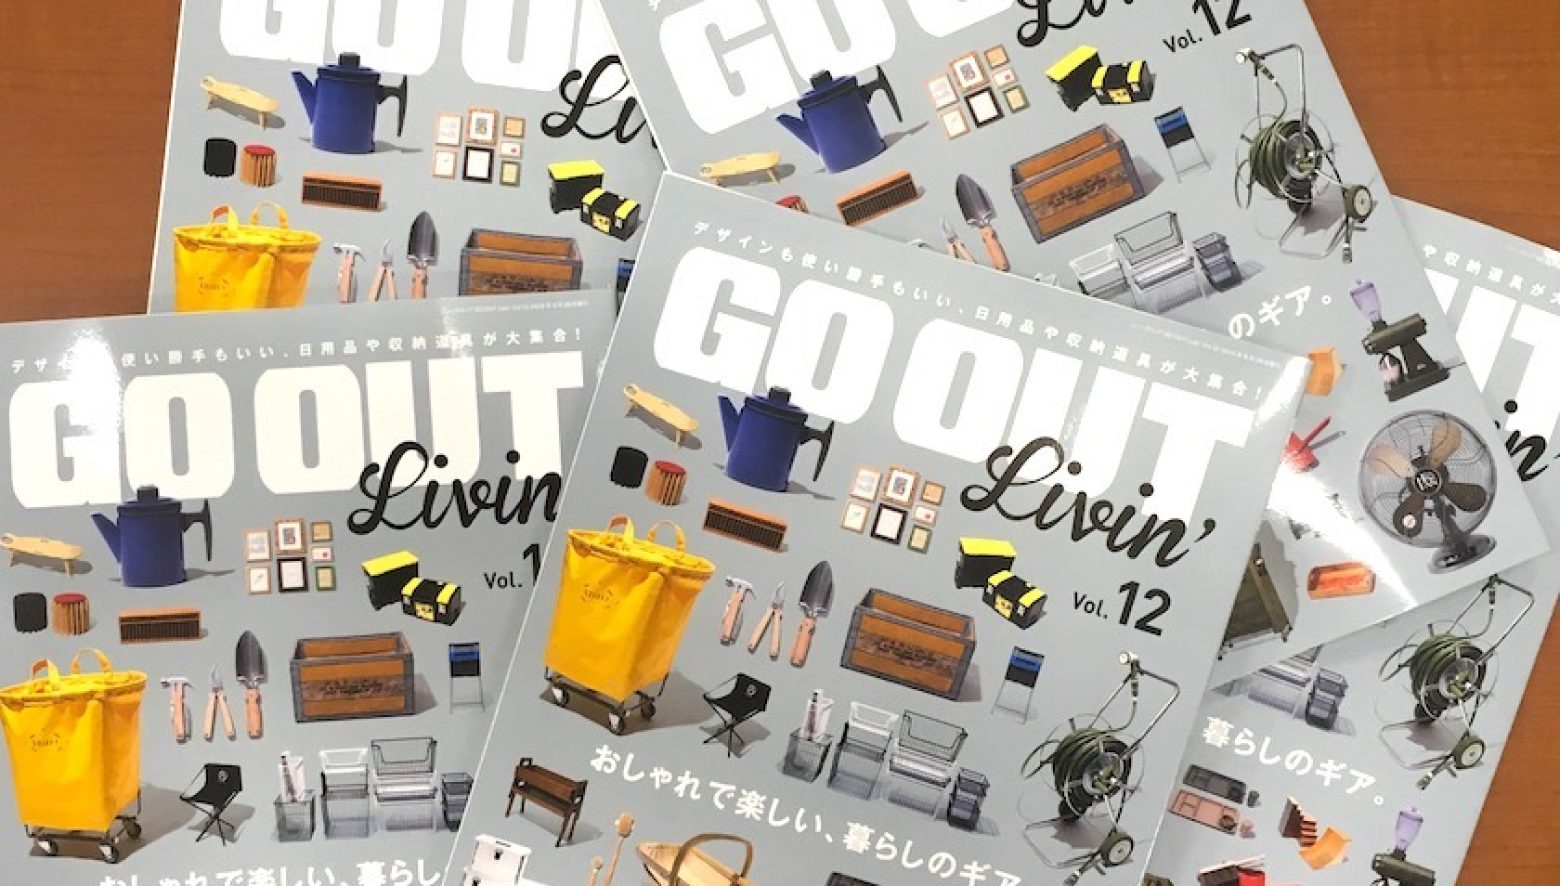 GO OUT Livin' vol.12本日発売!! デザインも使い勝手もいい、日用品や収納道具が大集合！